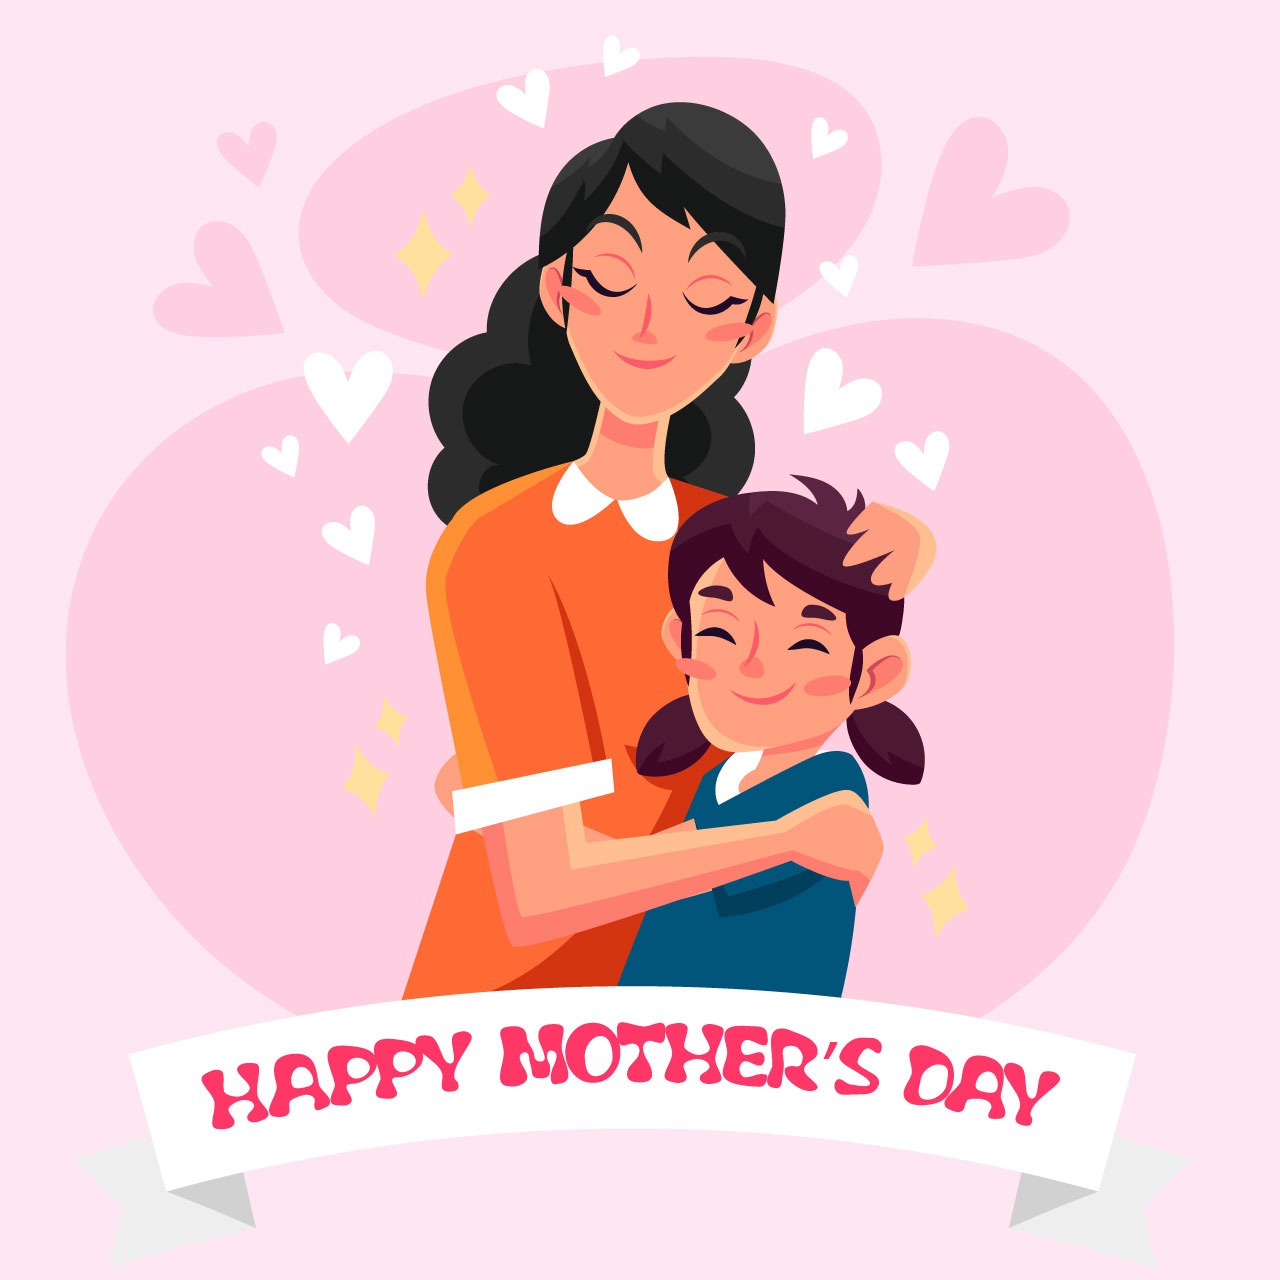 Mothers day hand drawing cartoon illustration image